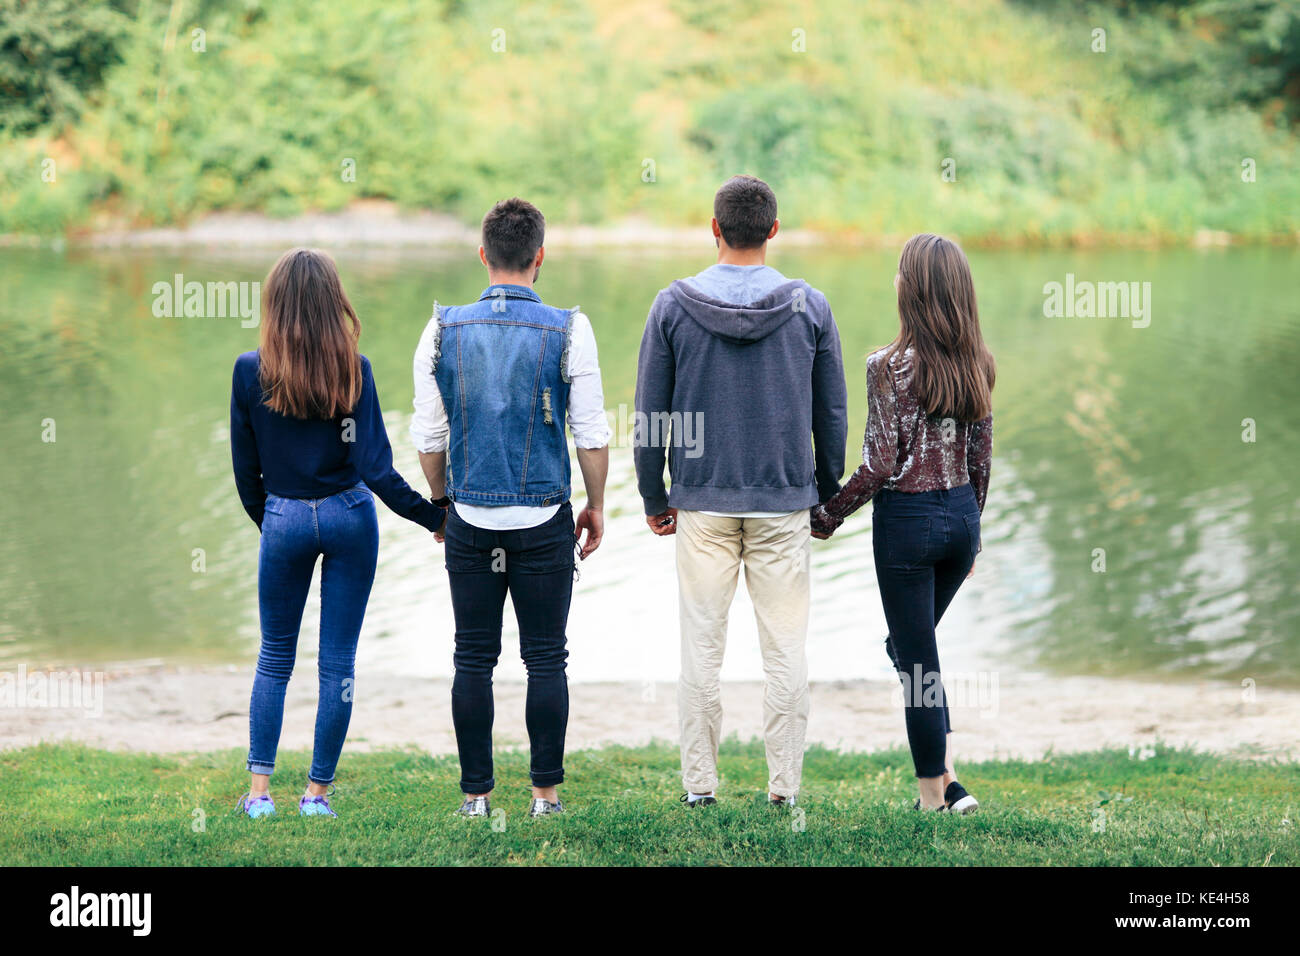 Two love couples standing by lake in park back view. Romantic rest of four young people in nature, two girls and two guys looking at calm water. Conte Stock Photo